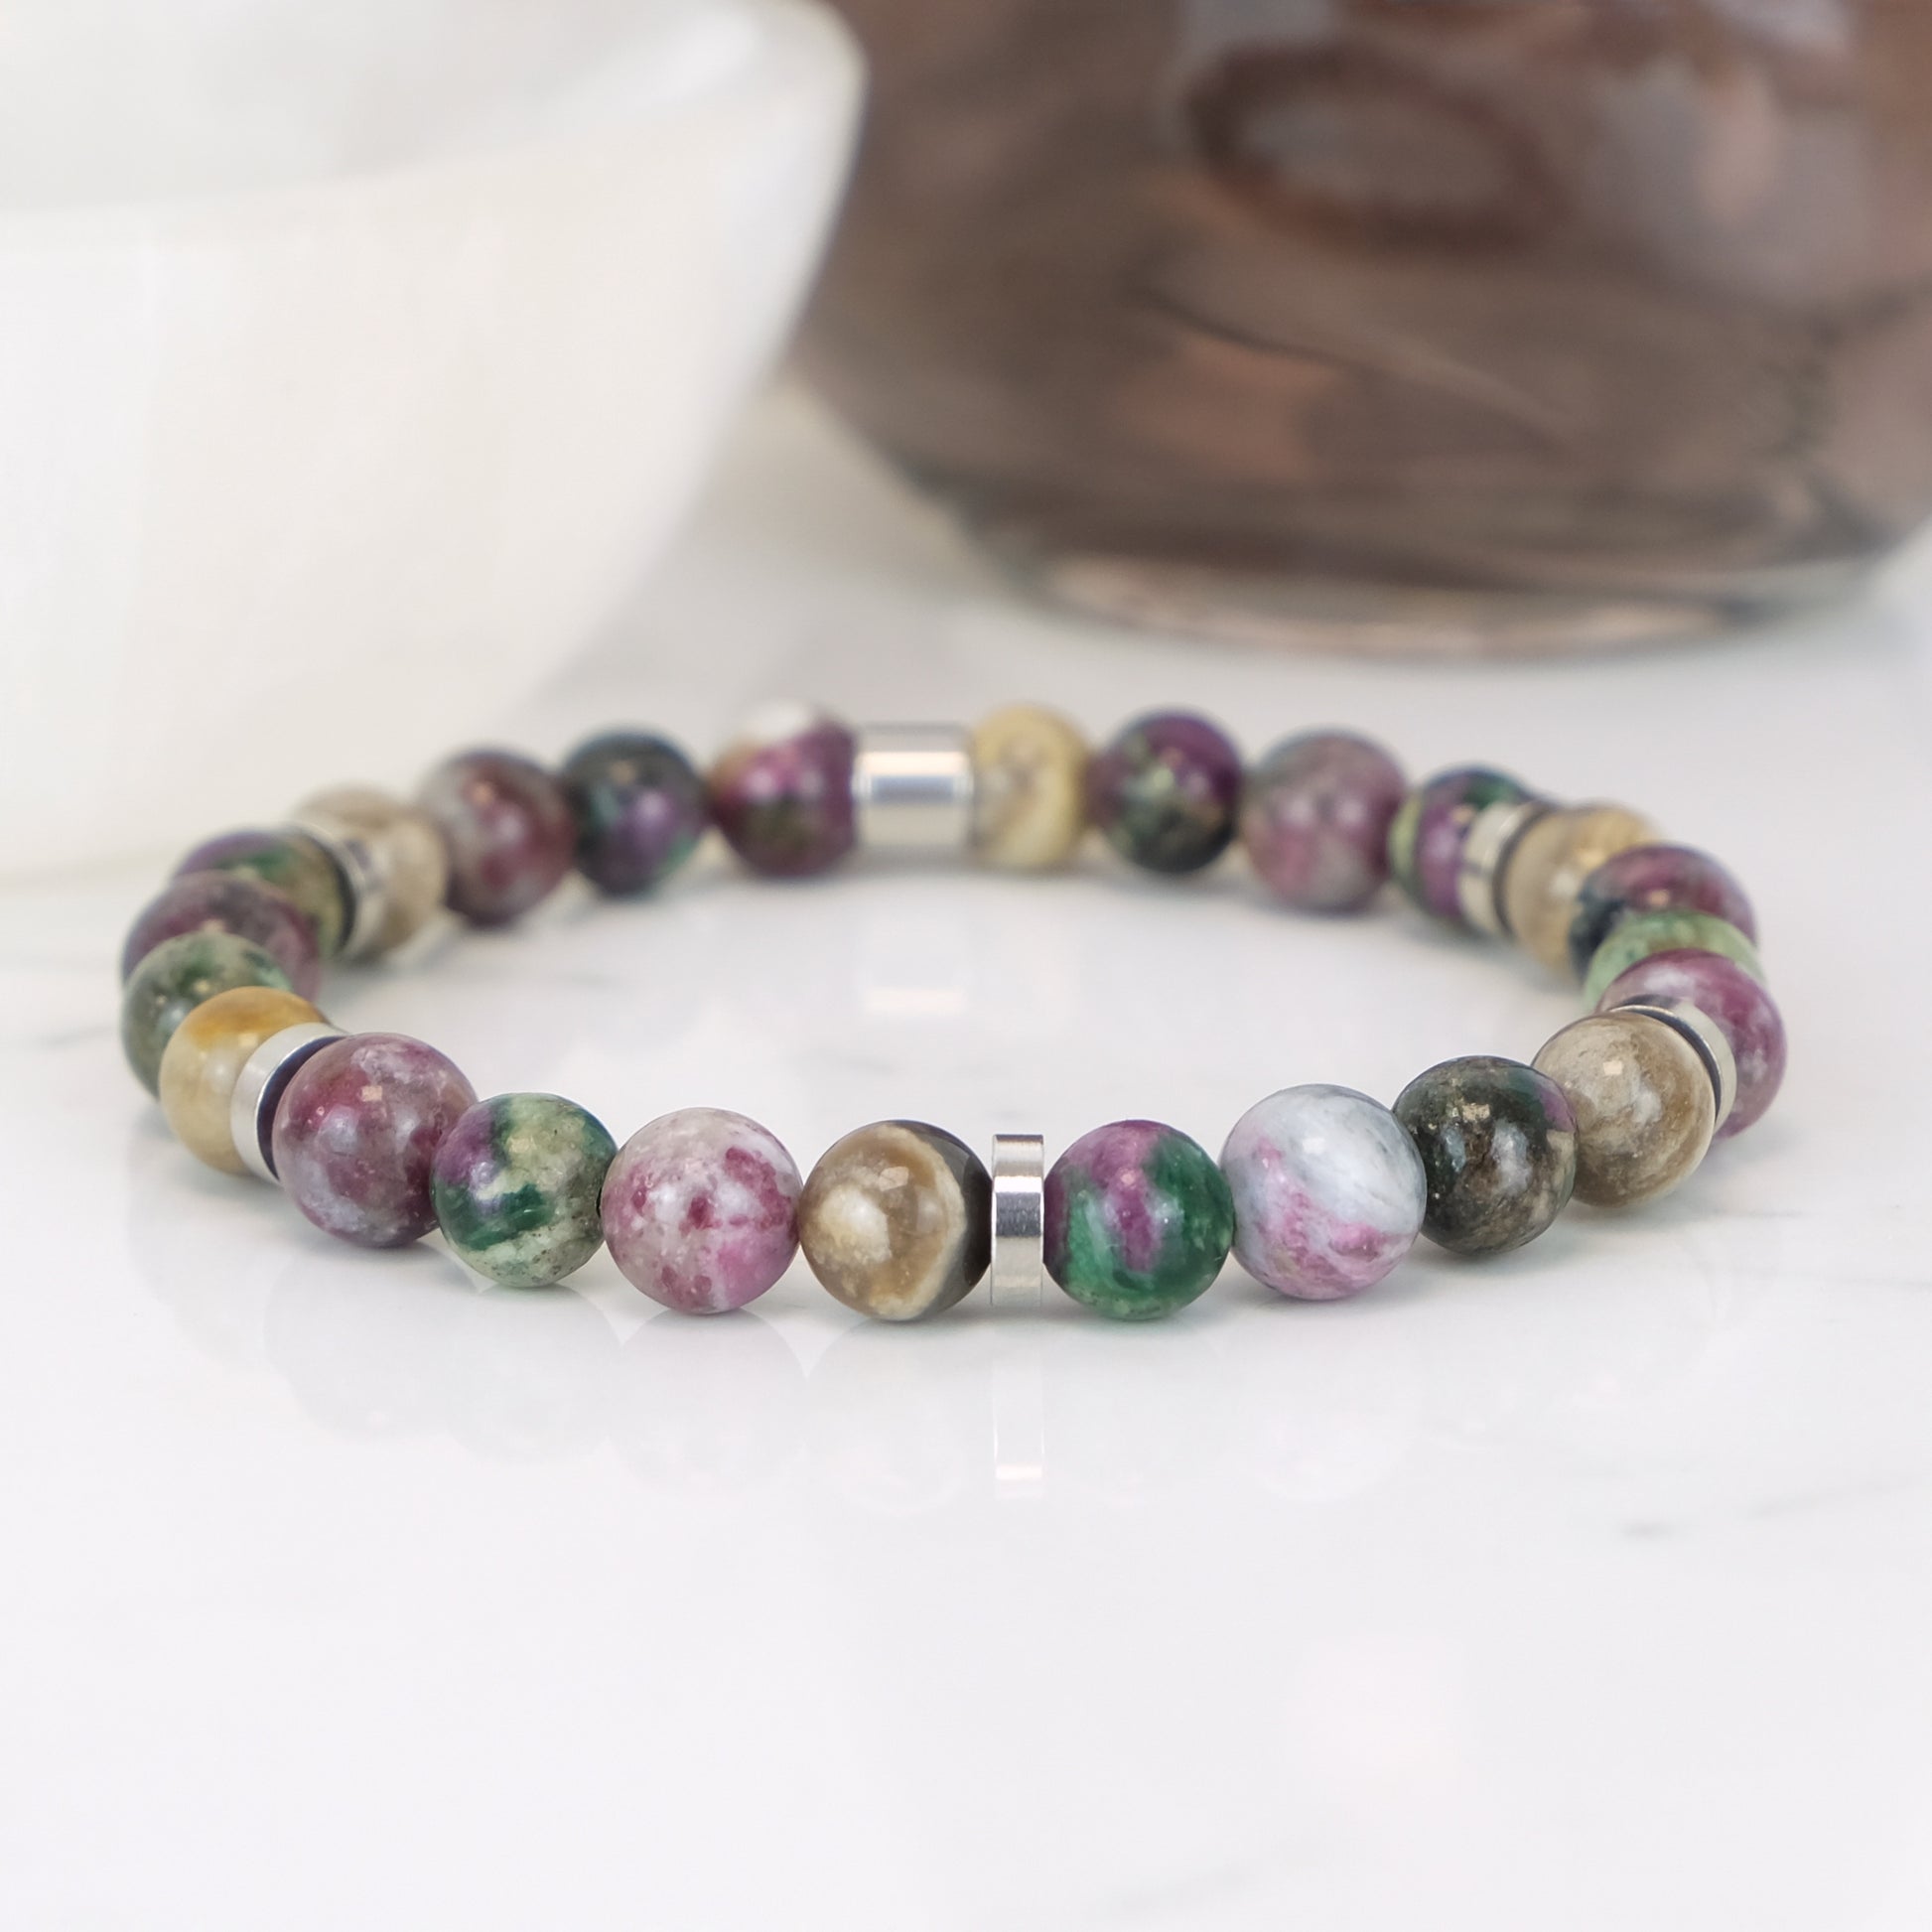 tourmaline, silver leaf and green lepidolite gemstone bracelet with stainless steel accessories